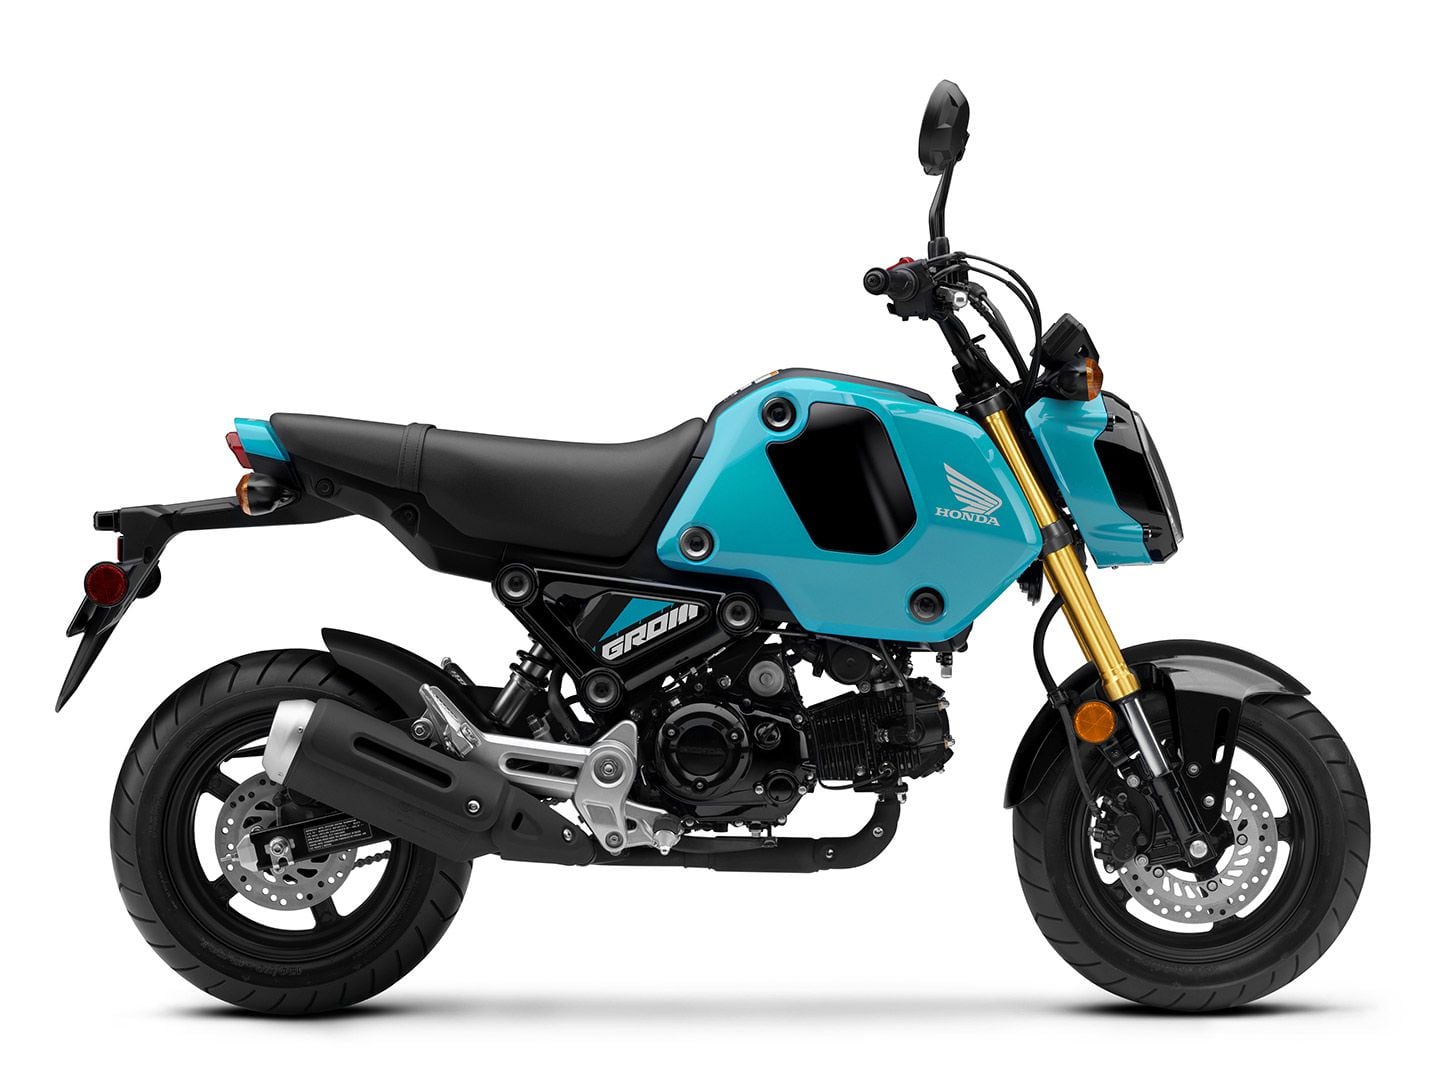 BMW Motorrad model revision measures for the model year 2022.